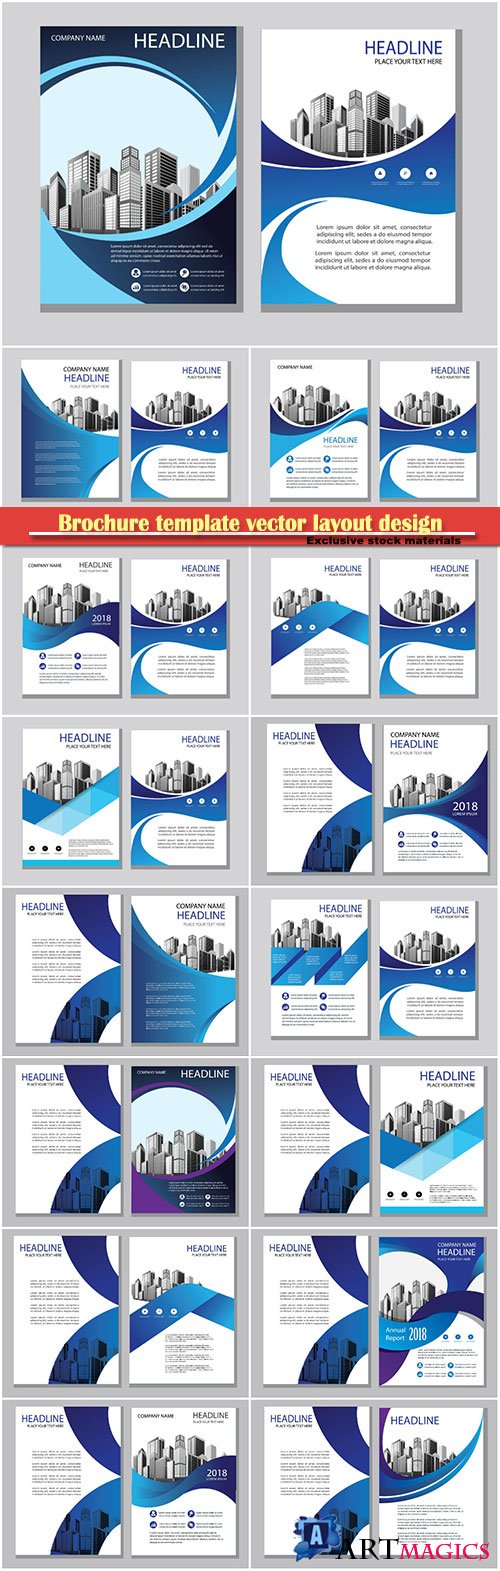 Brochure template vector layout design, corporate business annual report, magazine, flyer mockup # 141